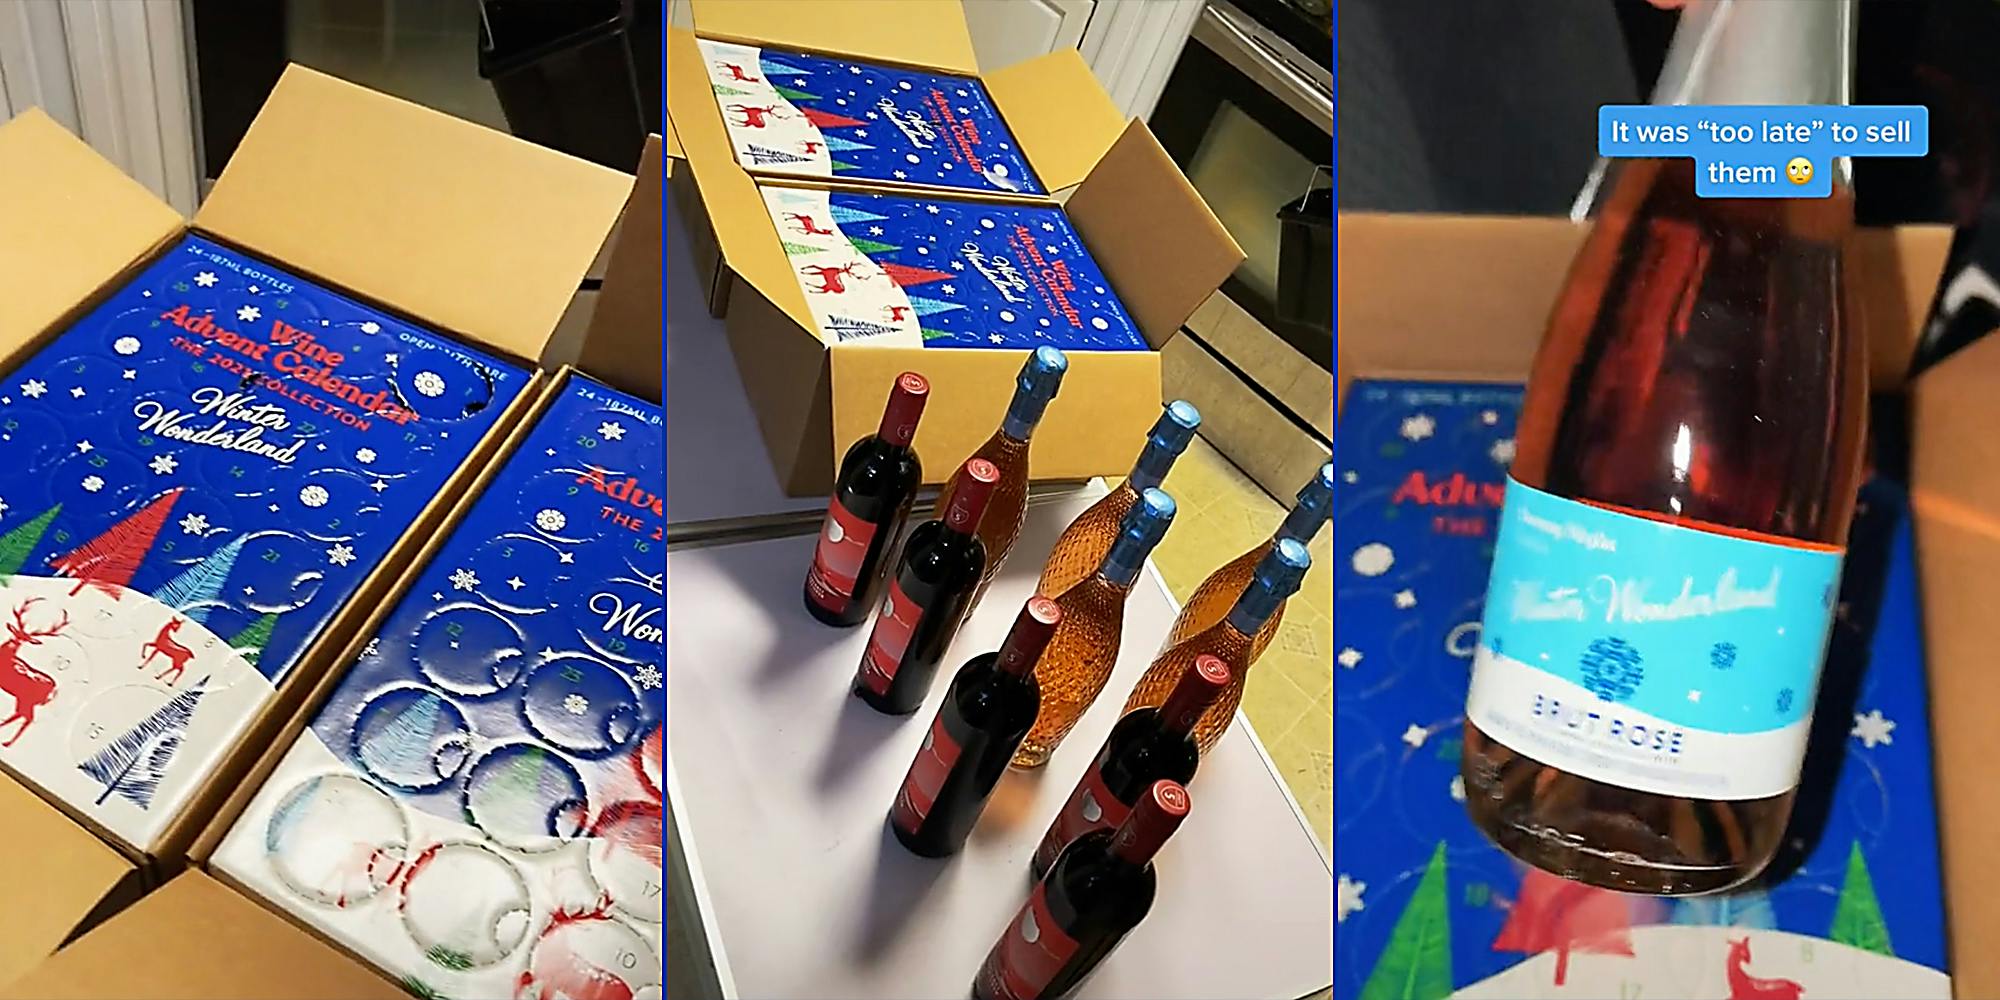 So much beer and wine : Dumpster diver discovers unopened wine advent